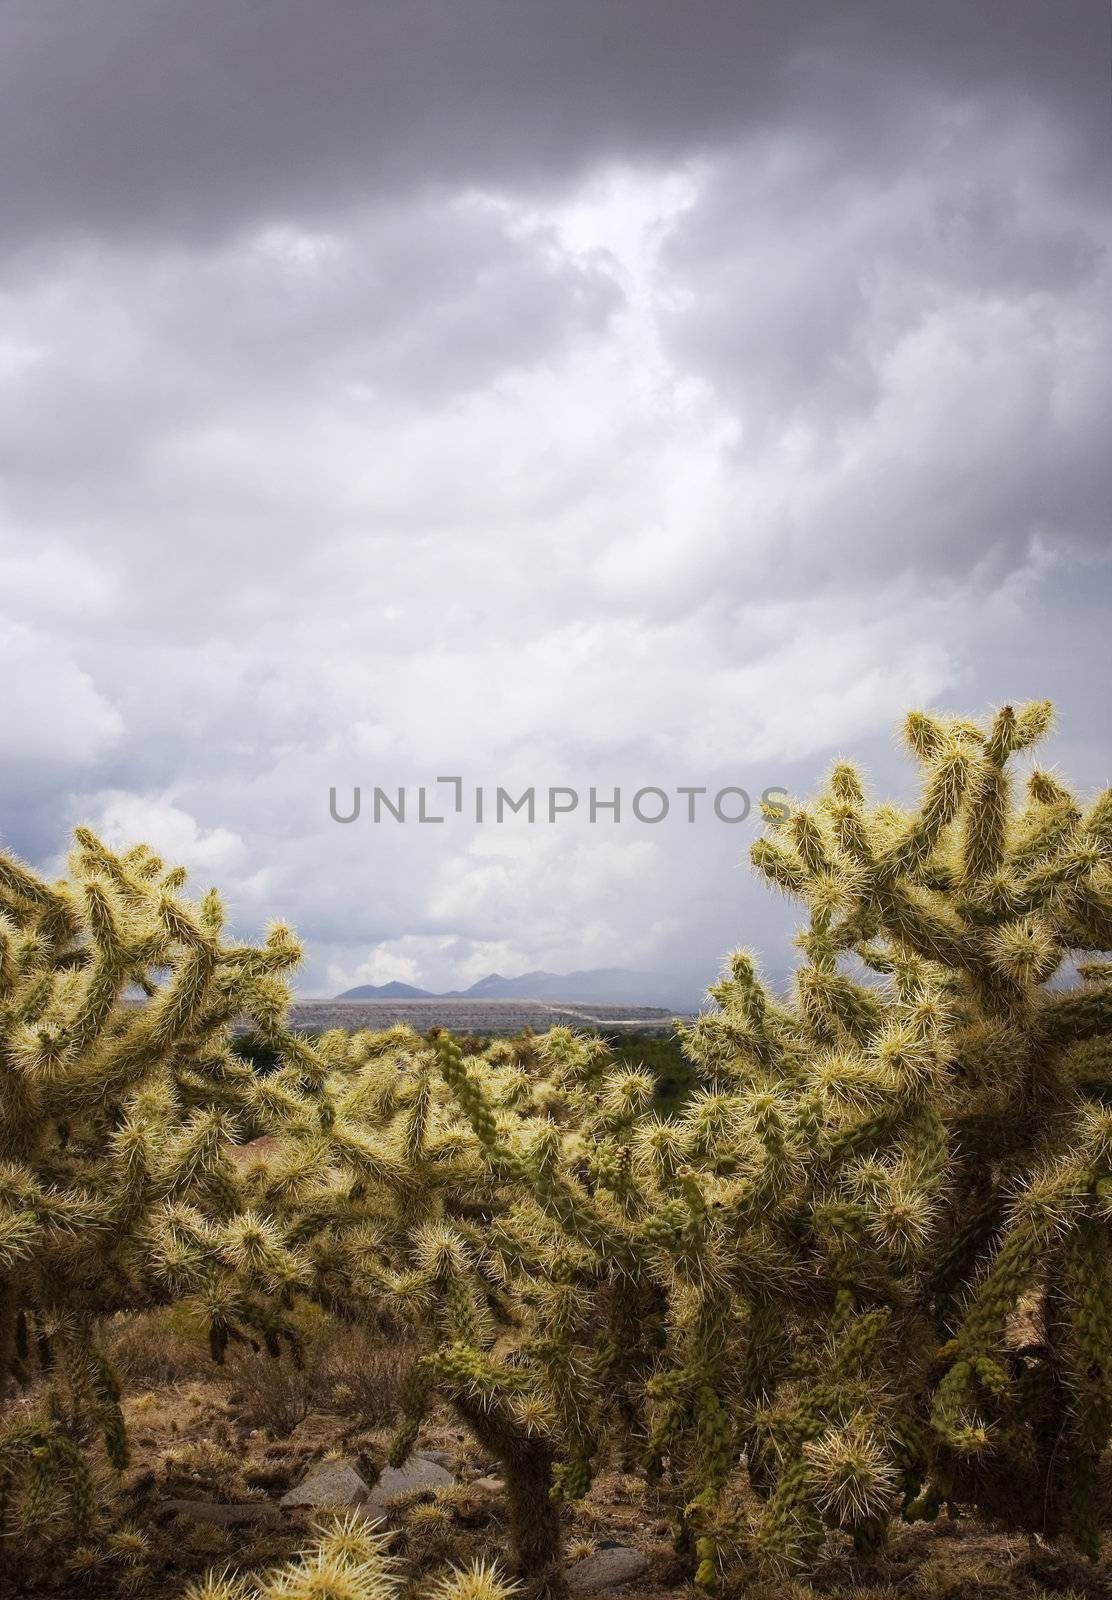 Cactus on a Stormy Day by Creatista